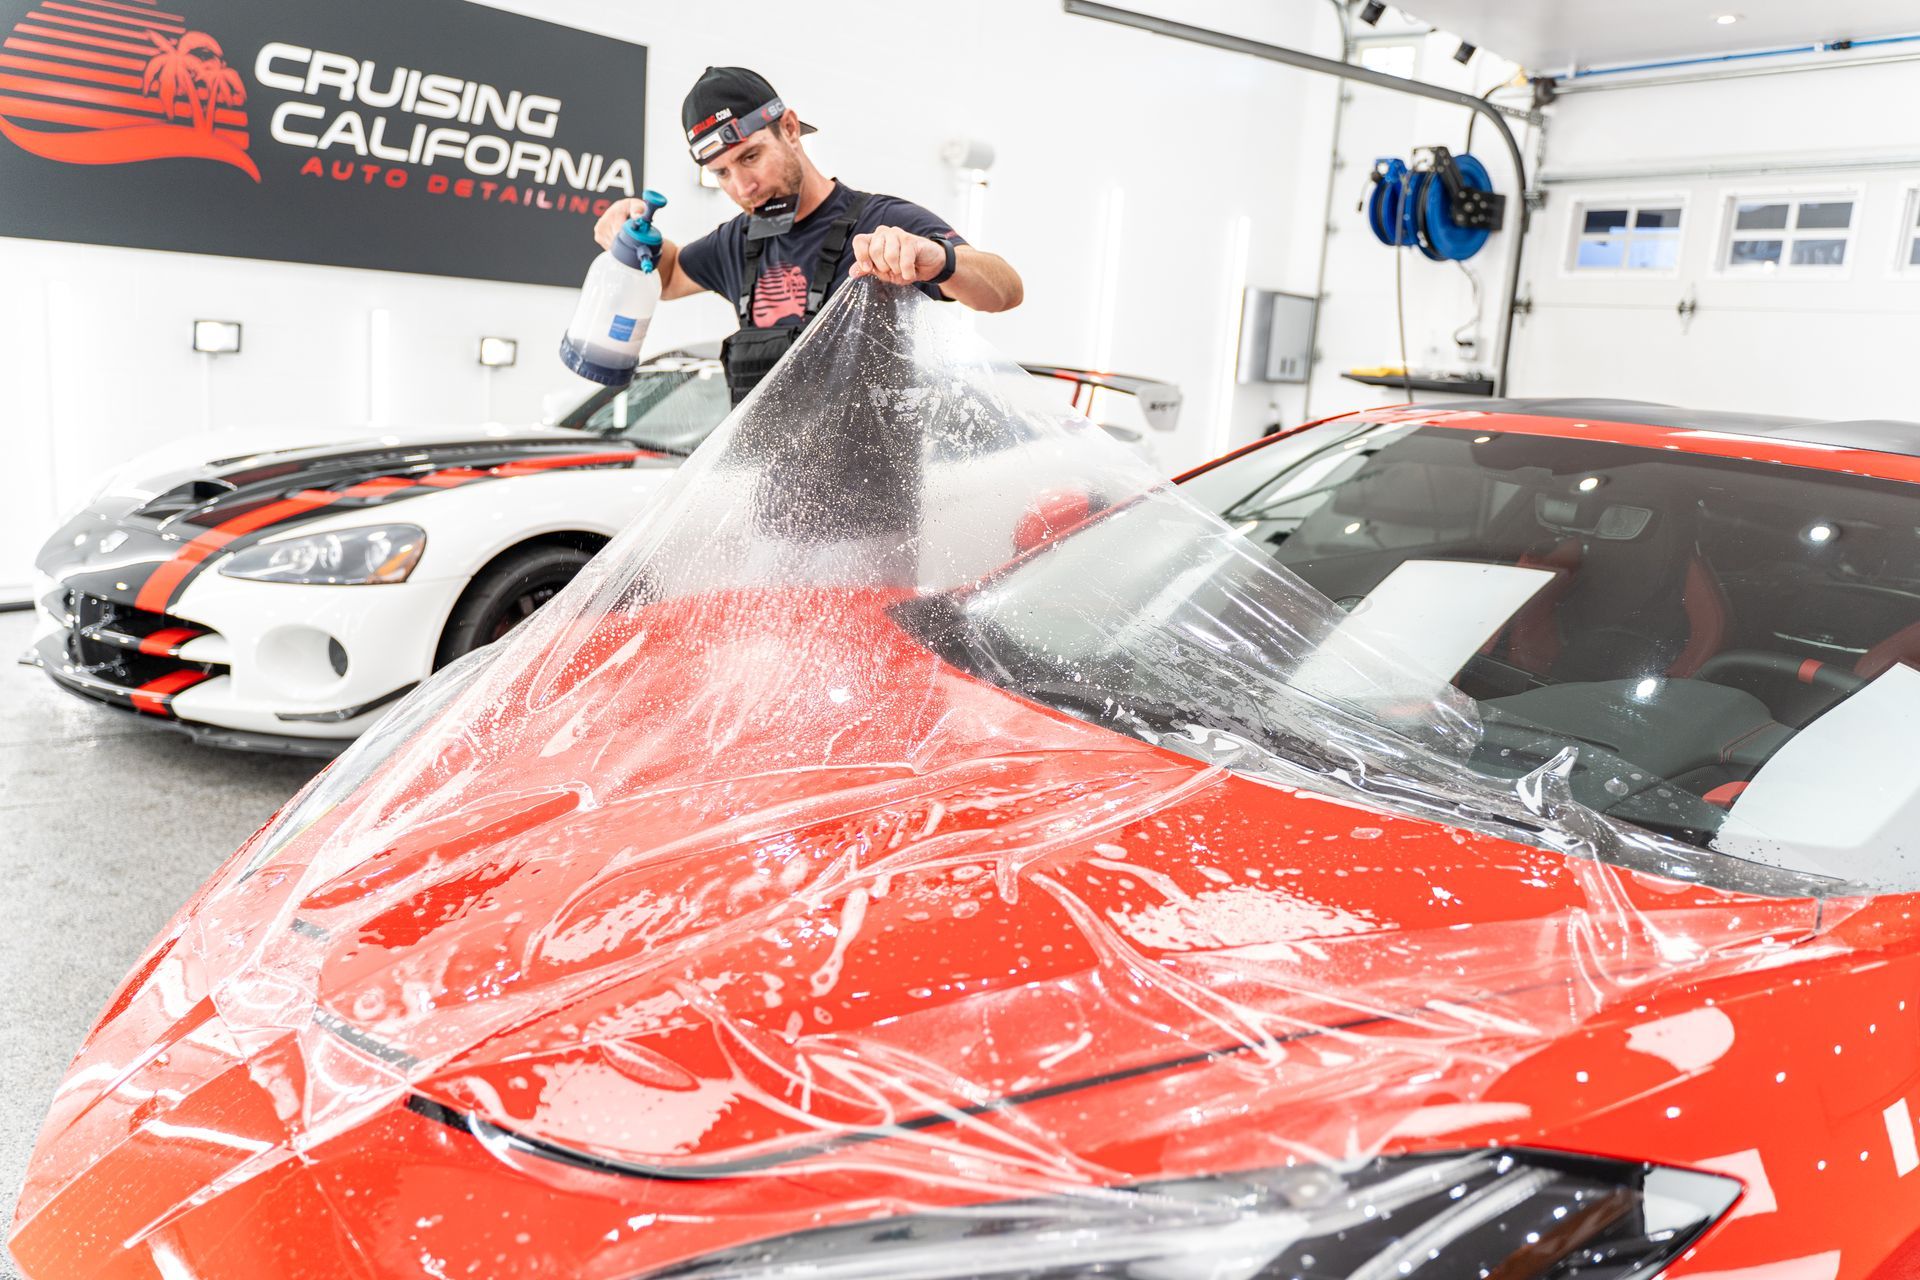 A man is wrapping a red sports car with plastic.